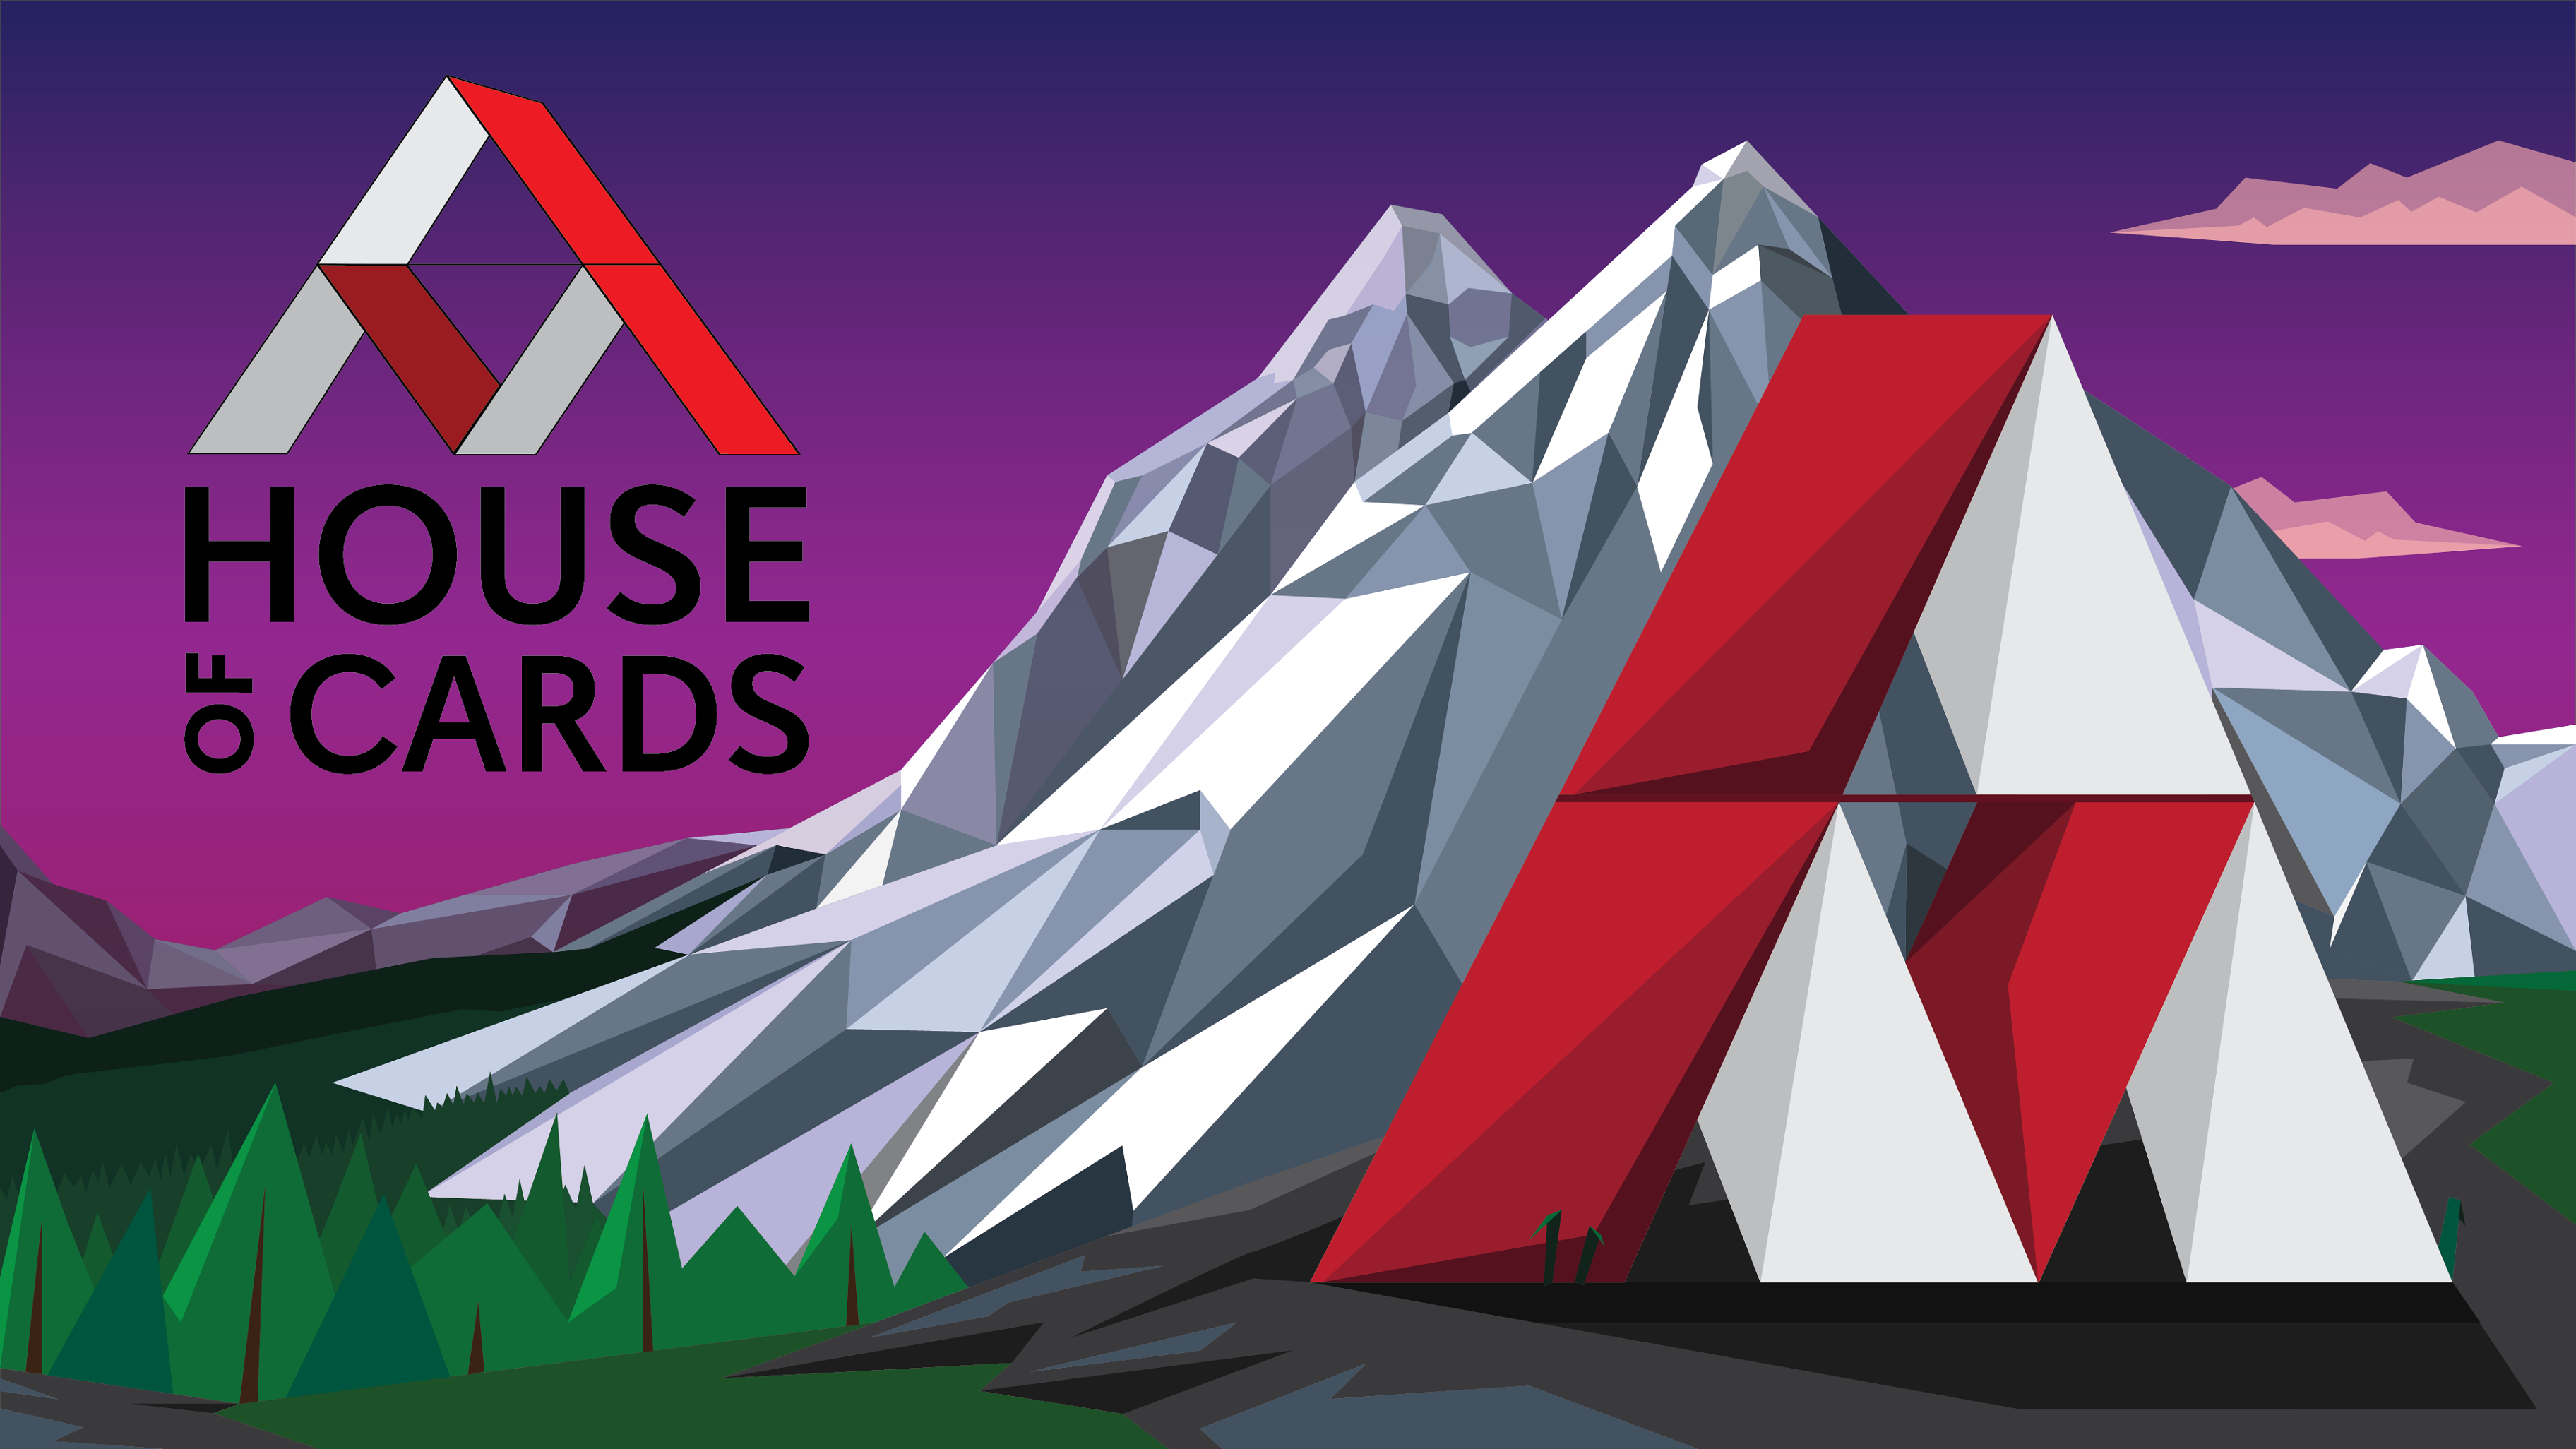 A polygonal illustration of a house of cards against a mountainous background.